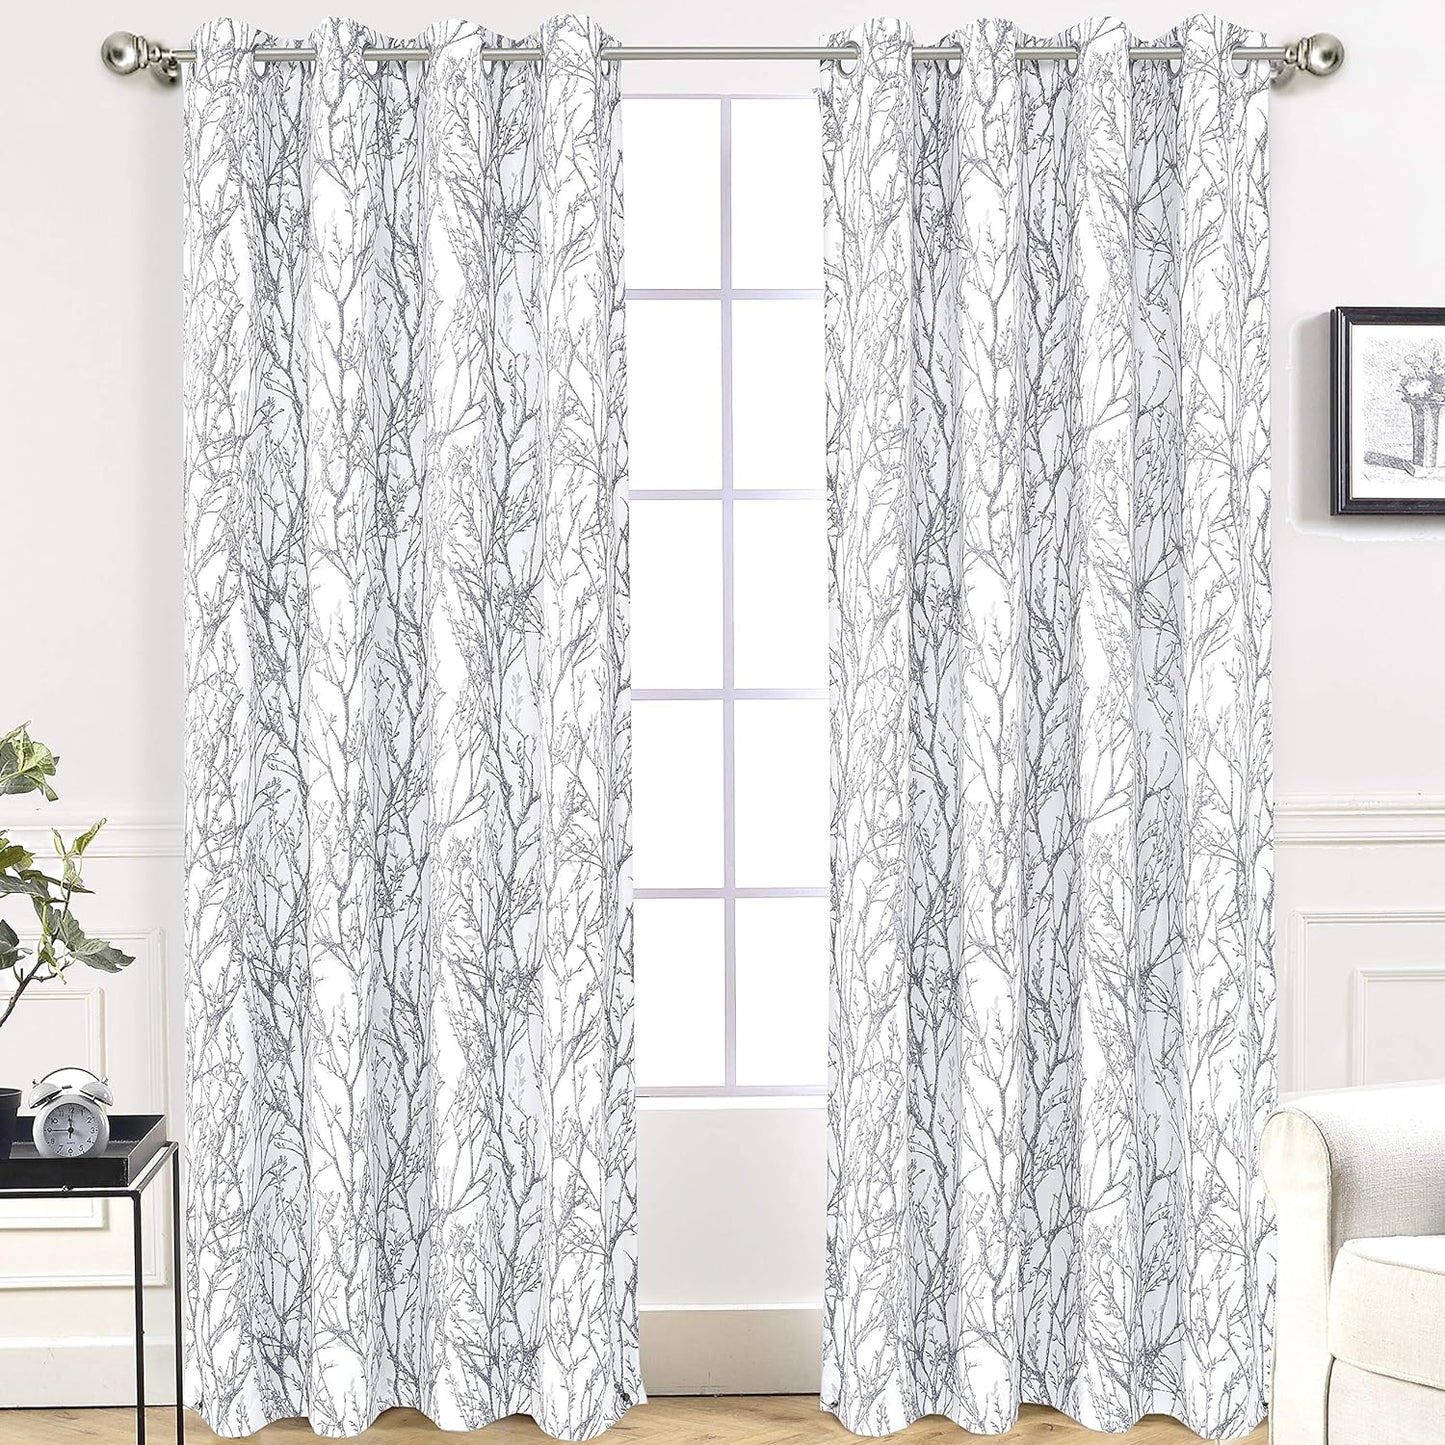 Driftaway Gray White Tree Branch Blackout Curtains for Bedroom Curtains 84 Inch Length 2 Panels Set Grey Branch Lined Window Treatment Thermal Grommet Top Curtain for Living Room Winter Warm Curtain  DriftAway Tree Branch-Gray 52"X96" 